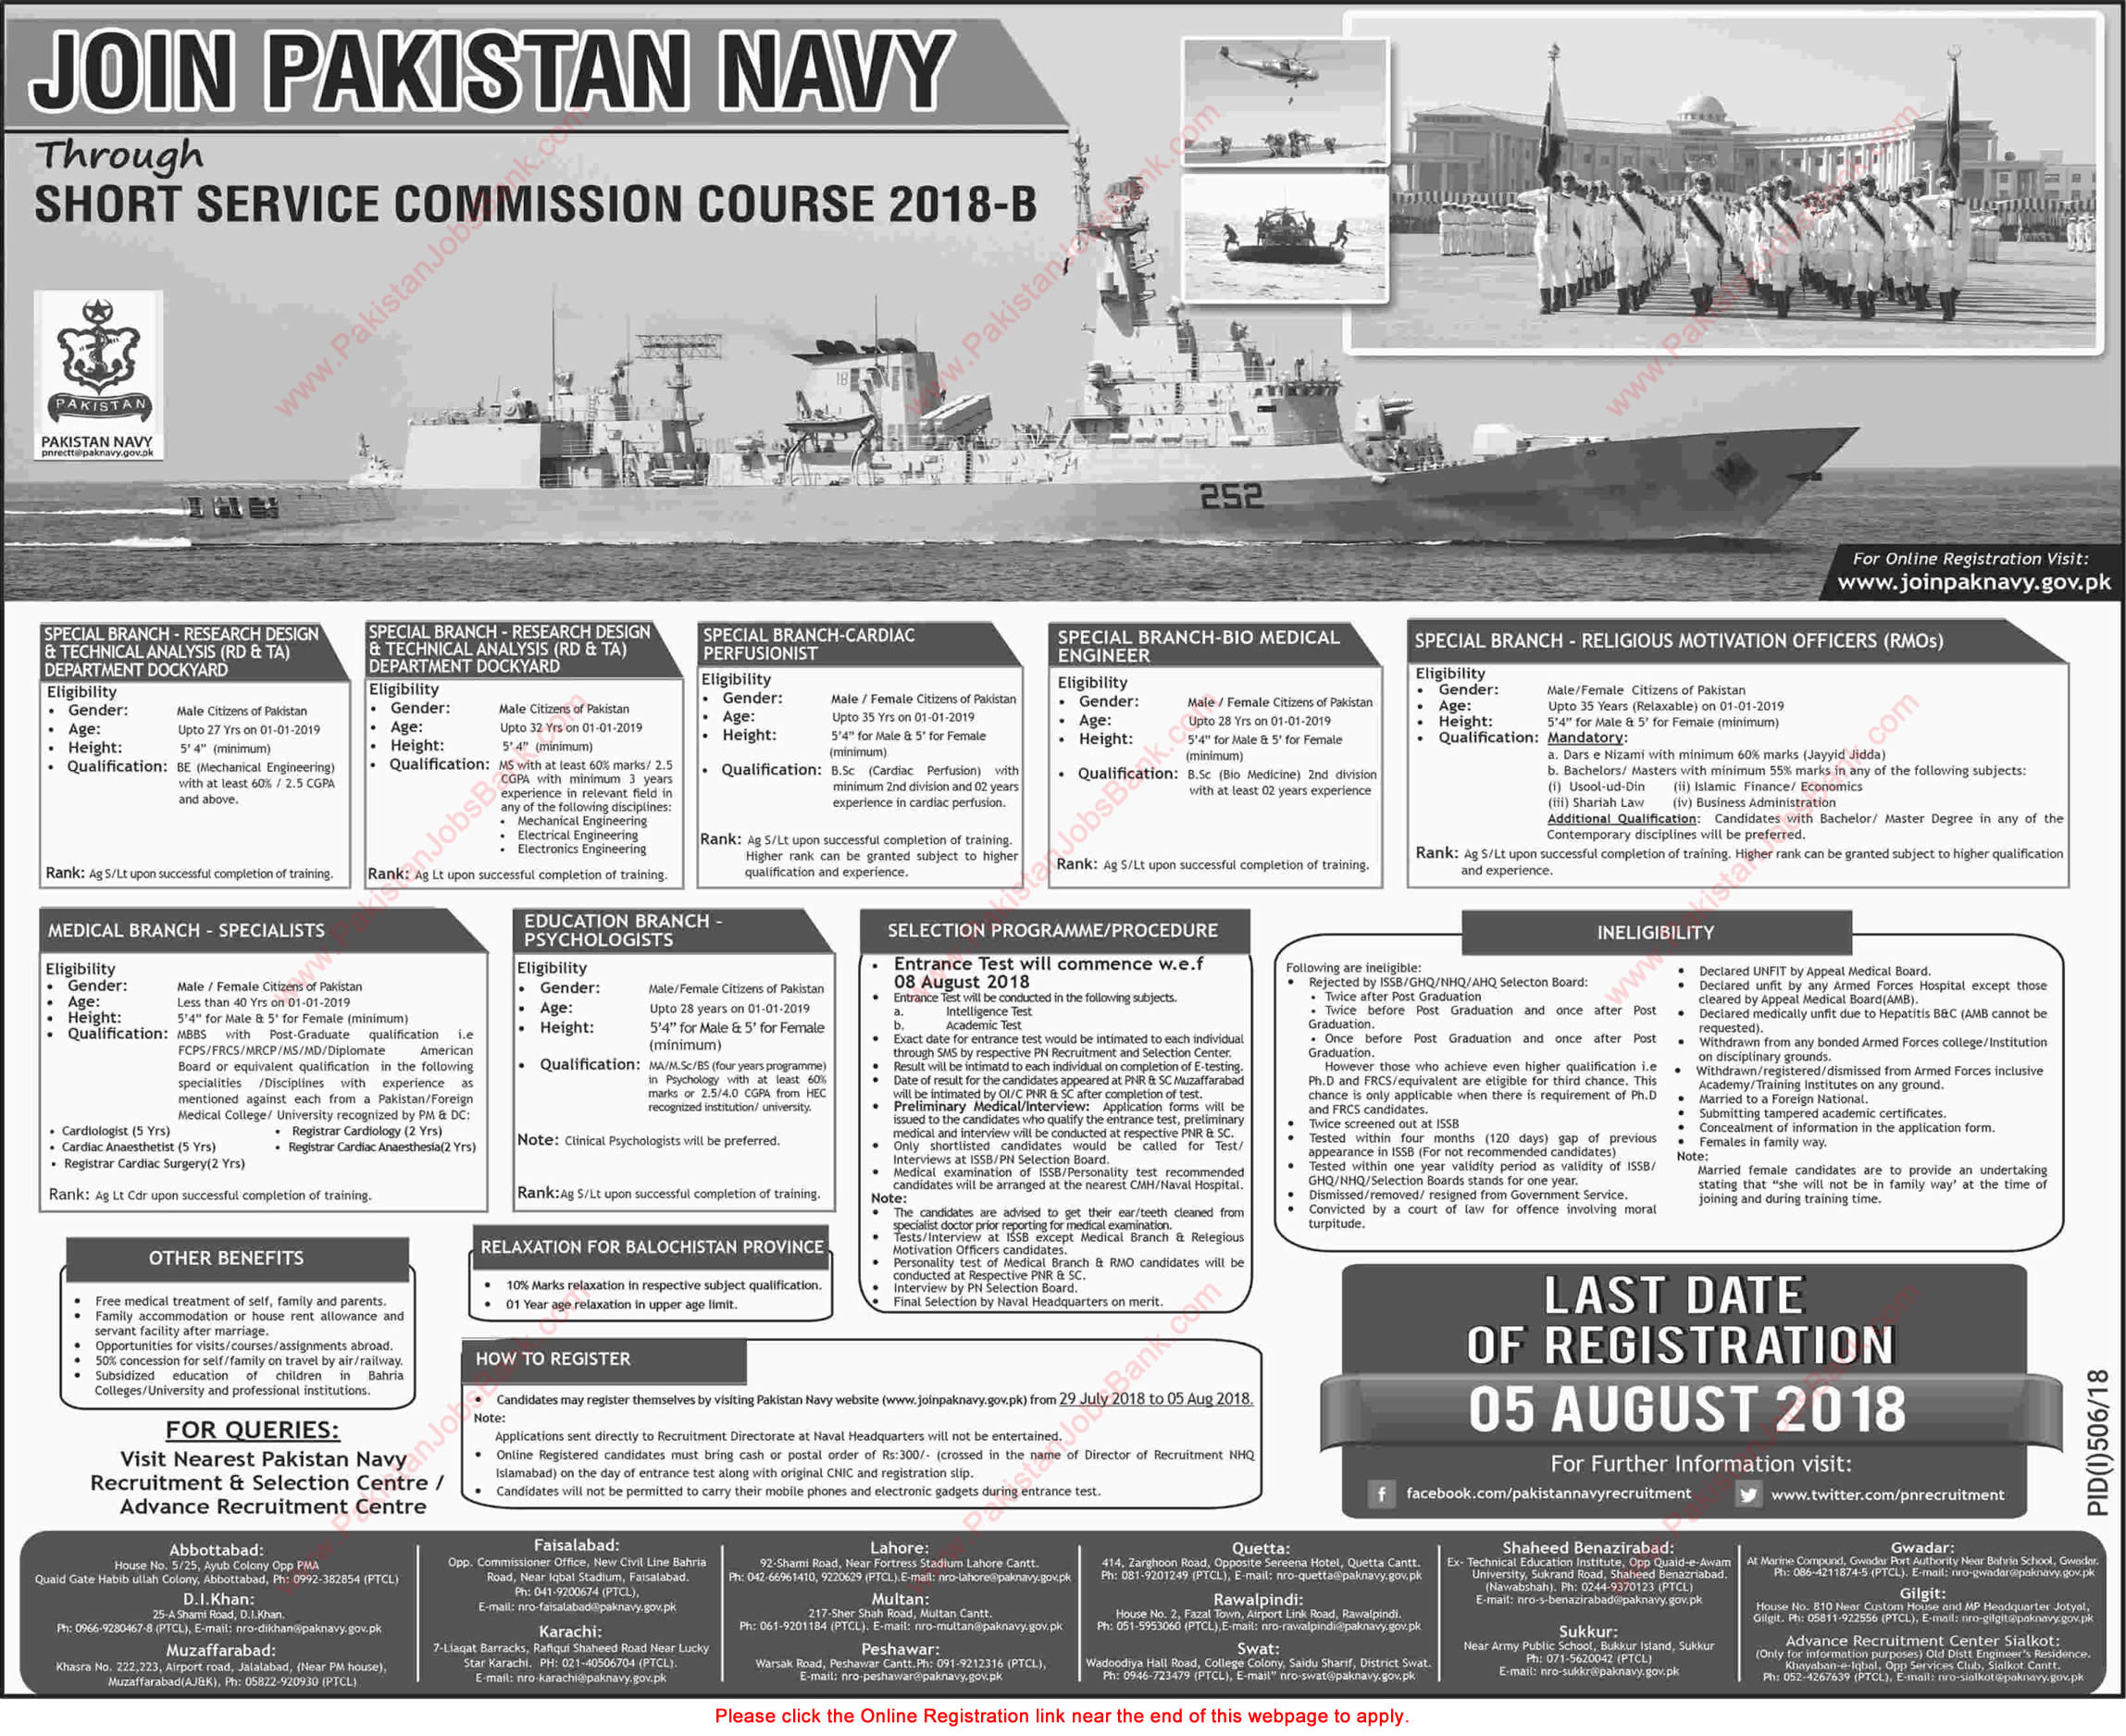 Join Pakistan Navy through Short Service Commission Course 2018-B Online Registration Latest / New